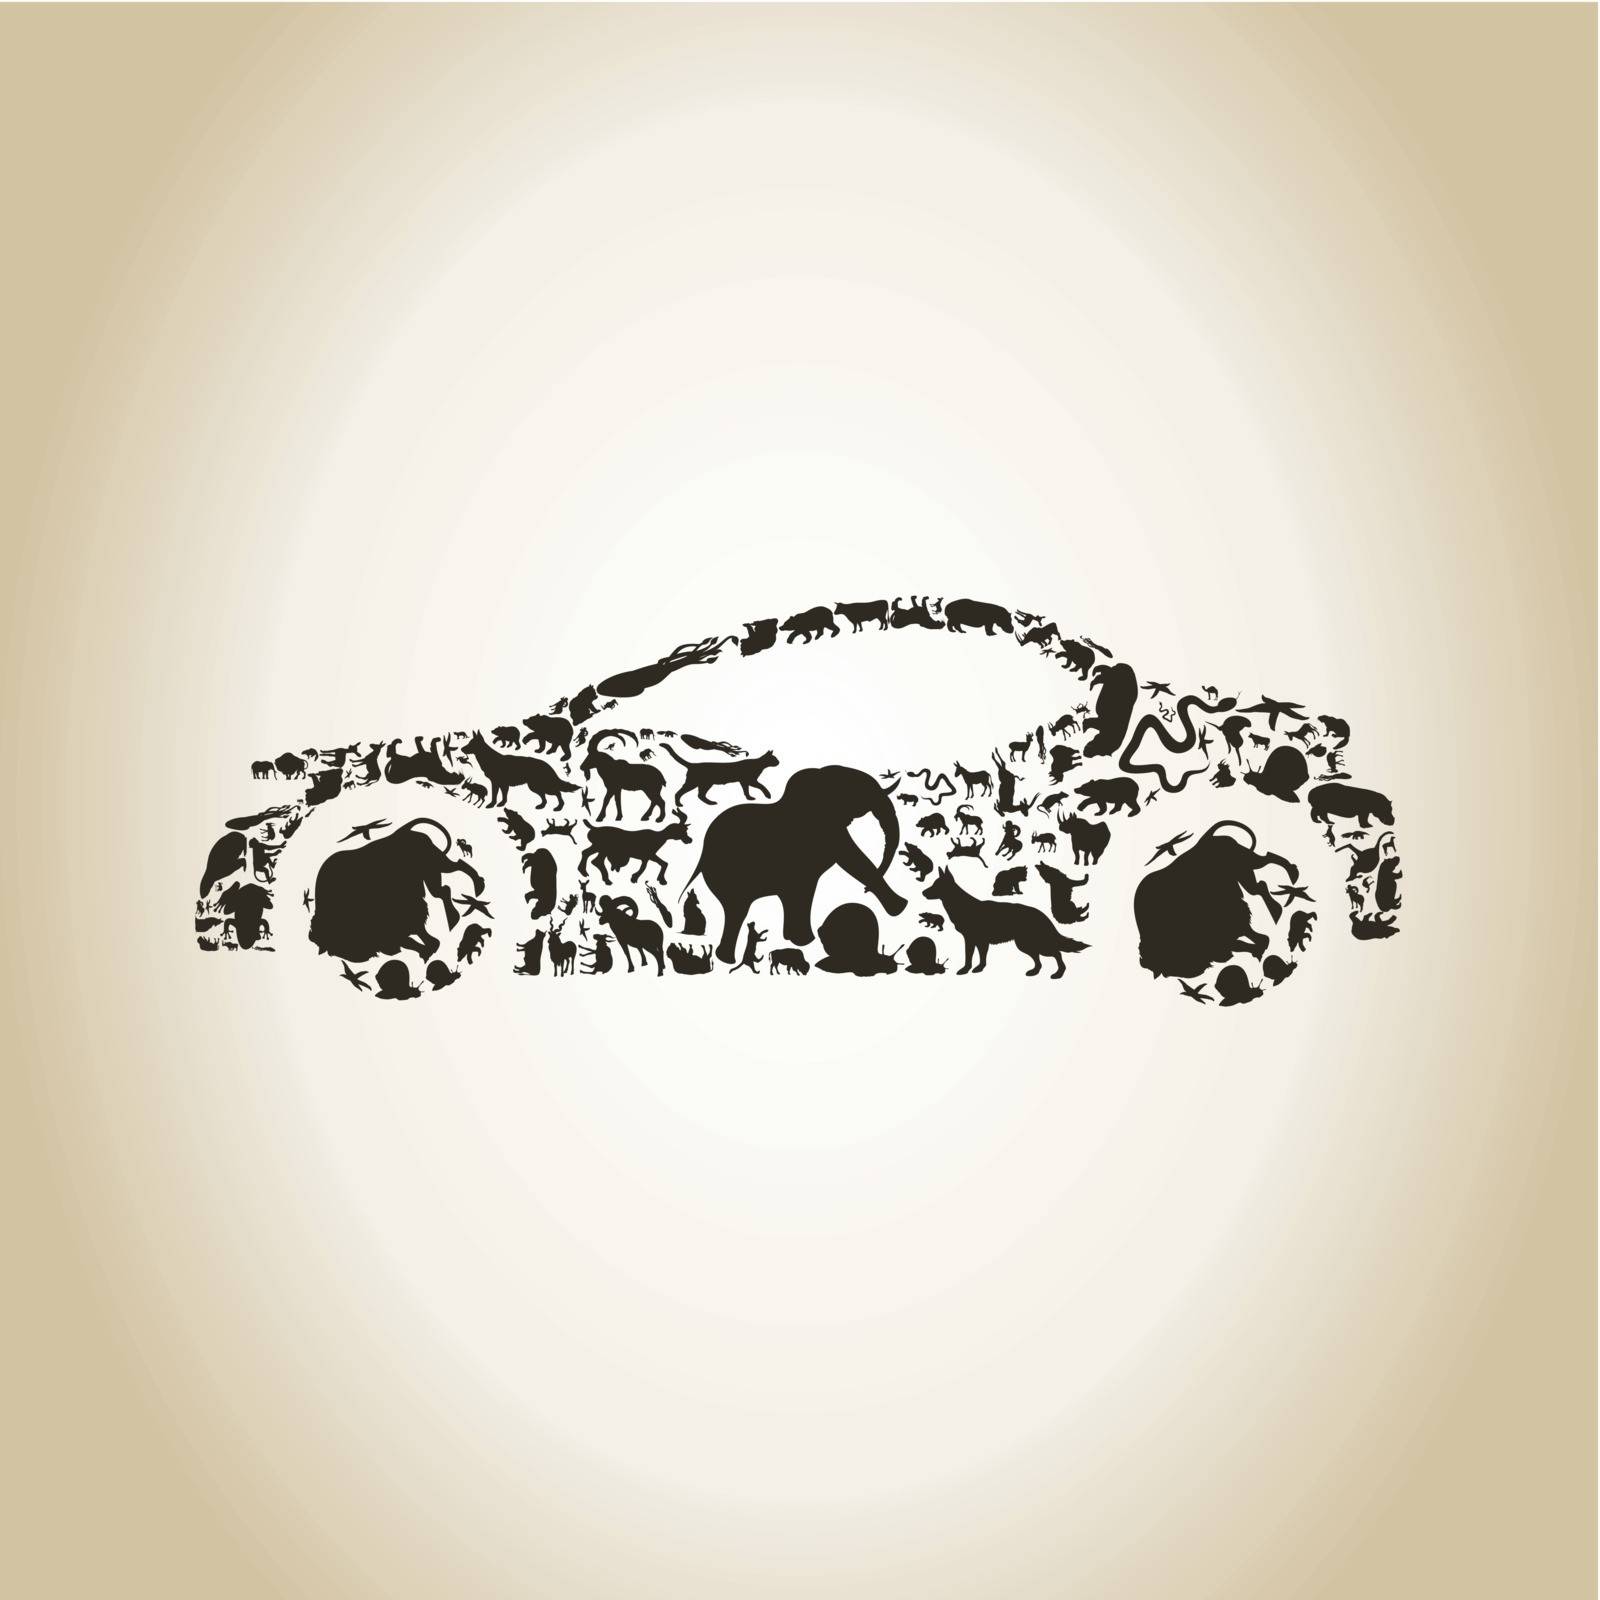 The car made of animals. A vector illustration